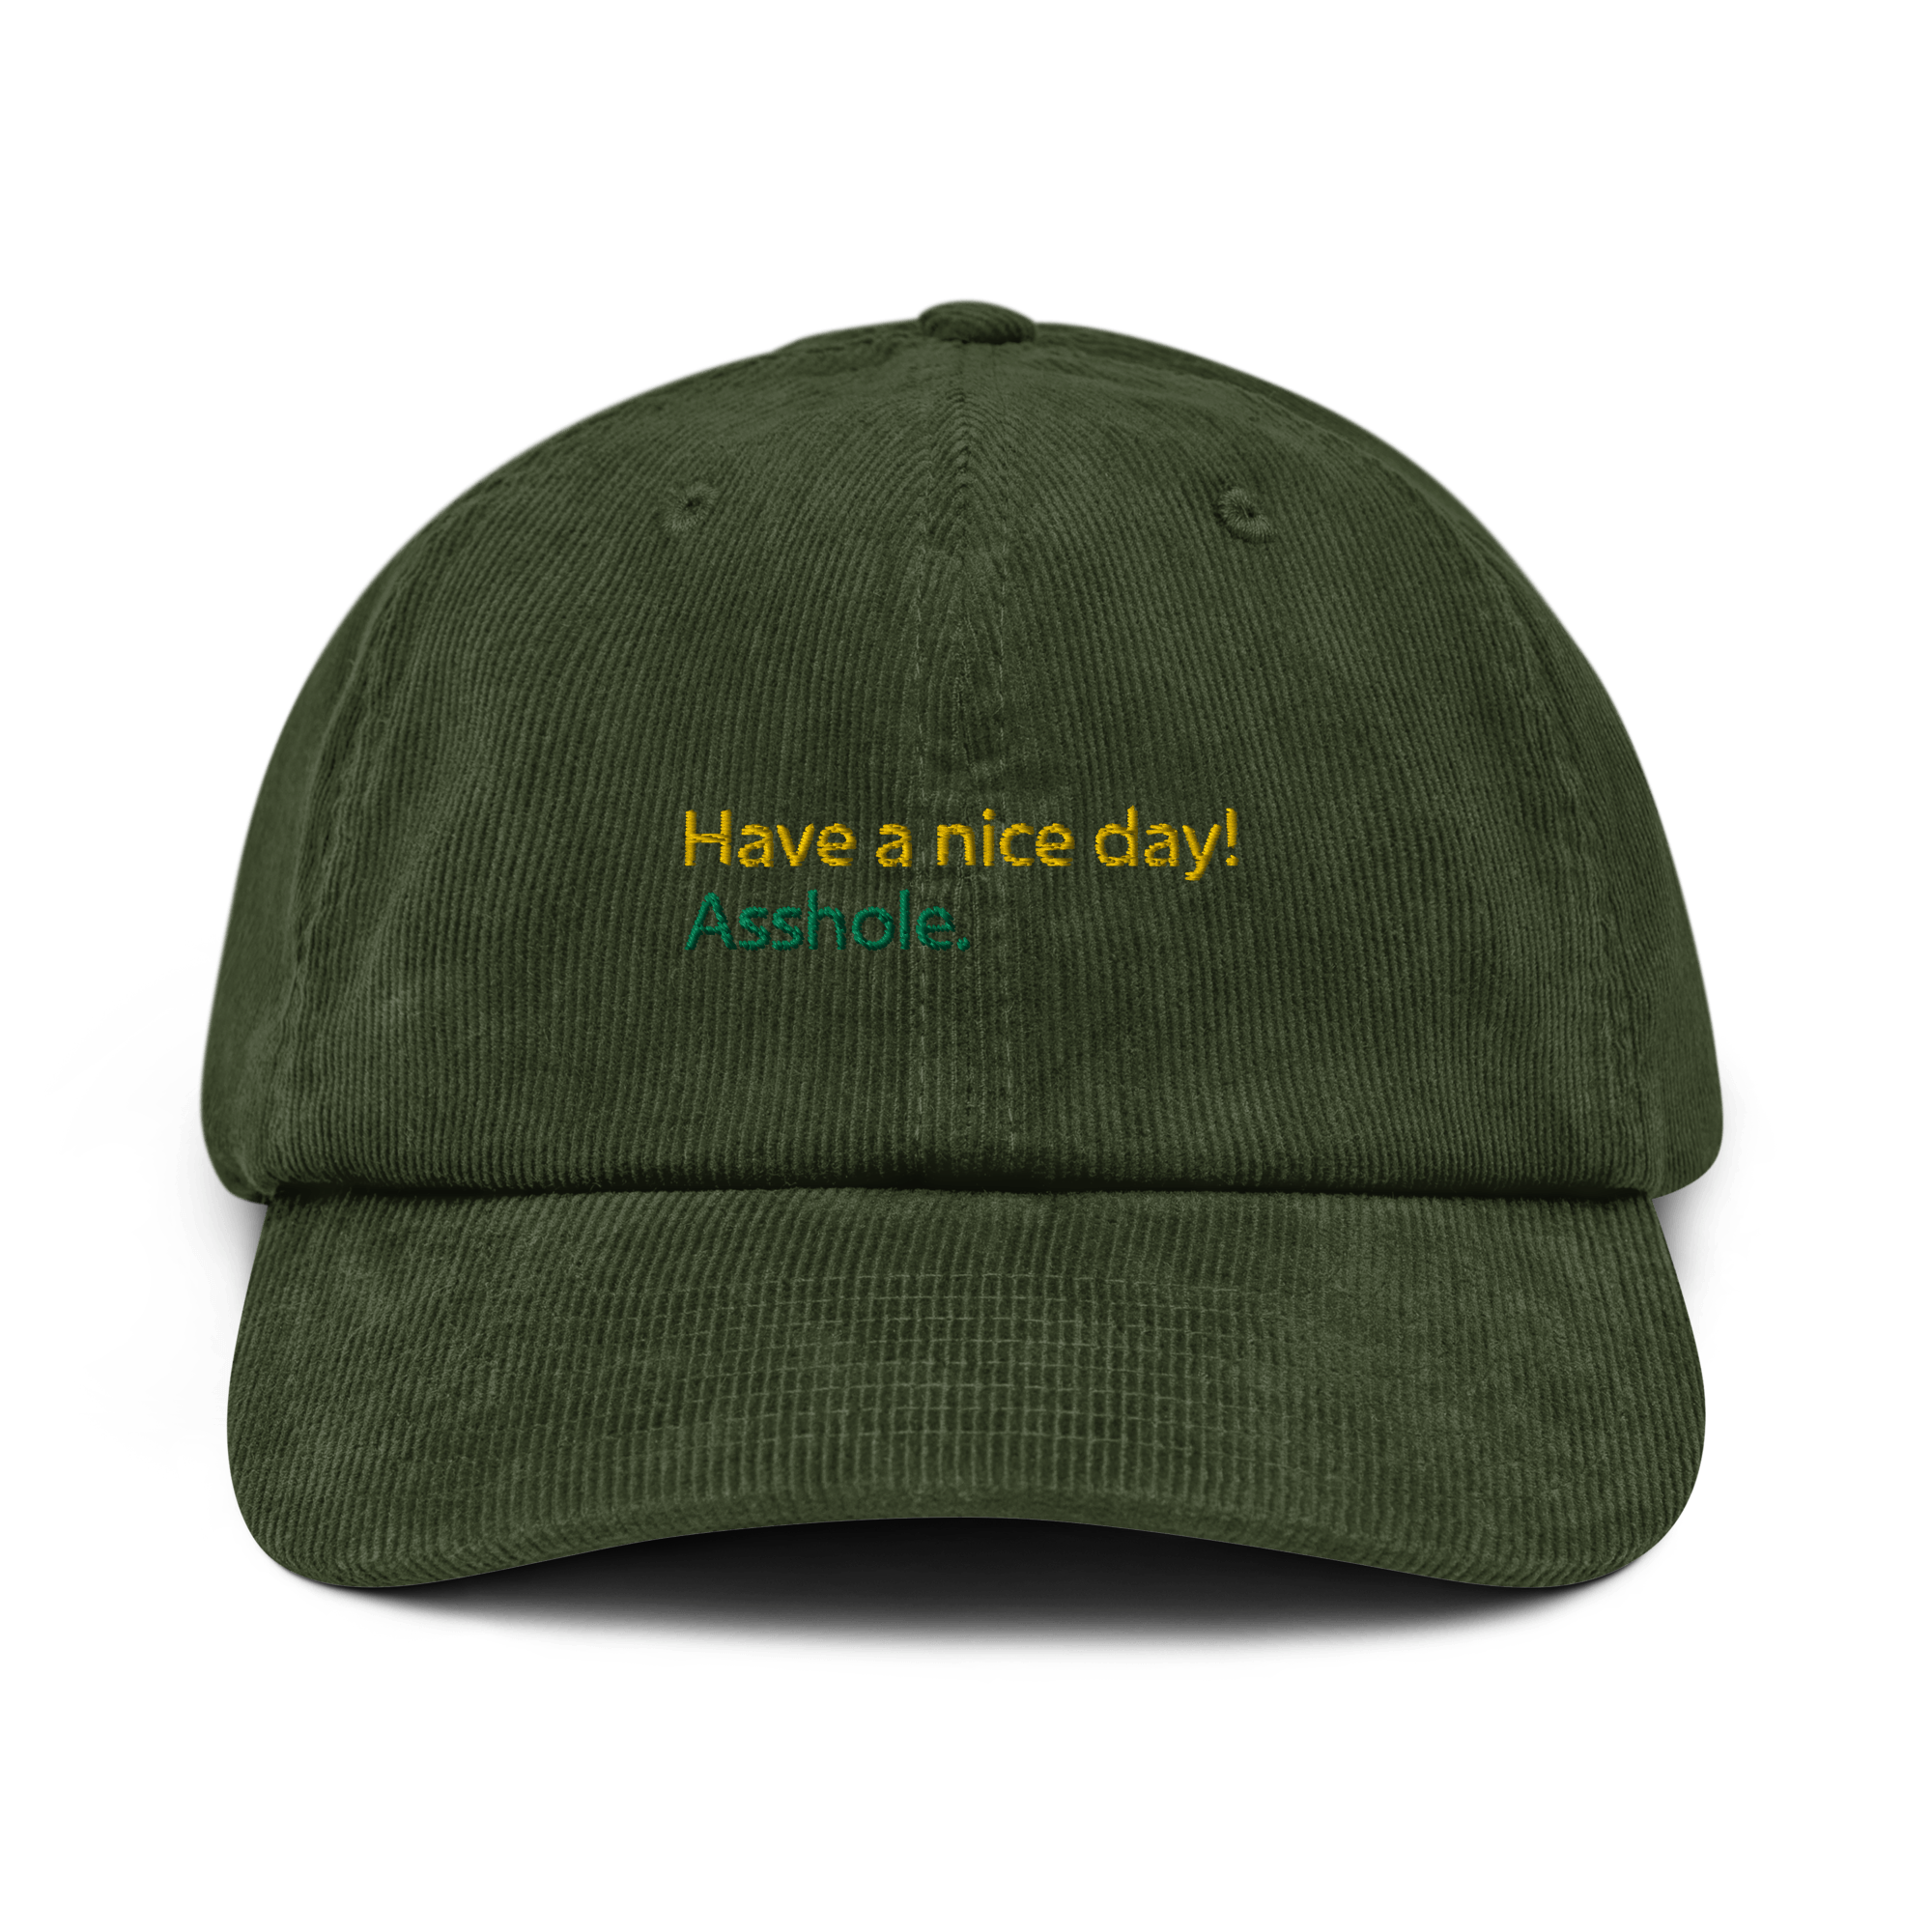 Have a nice day! (asshole) Corduroy hat, Dark Olive